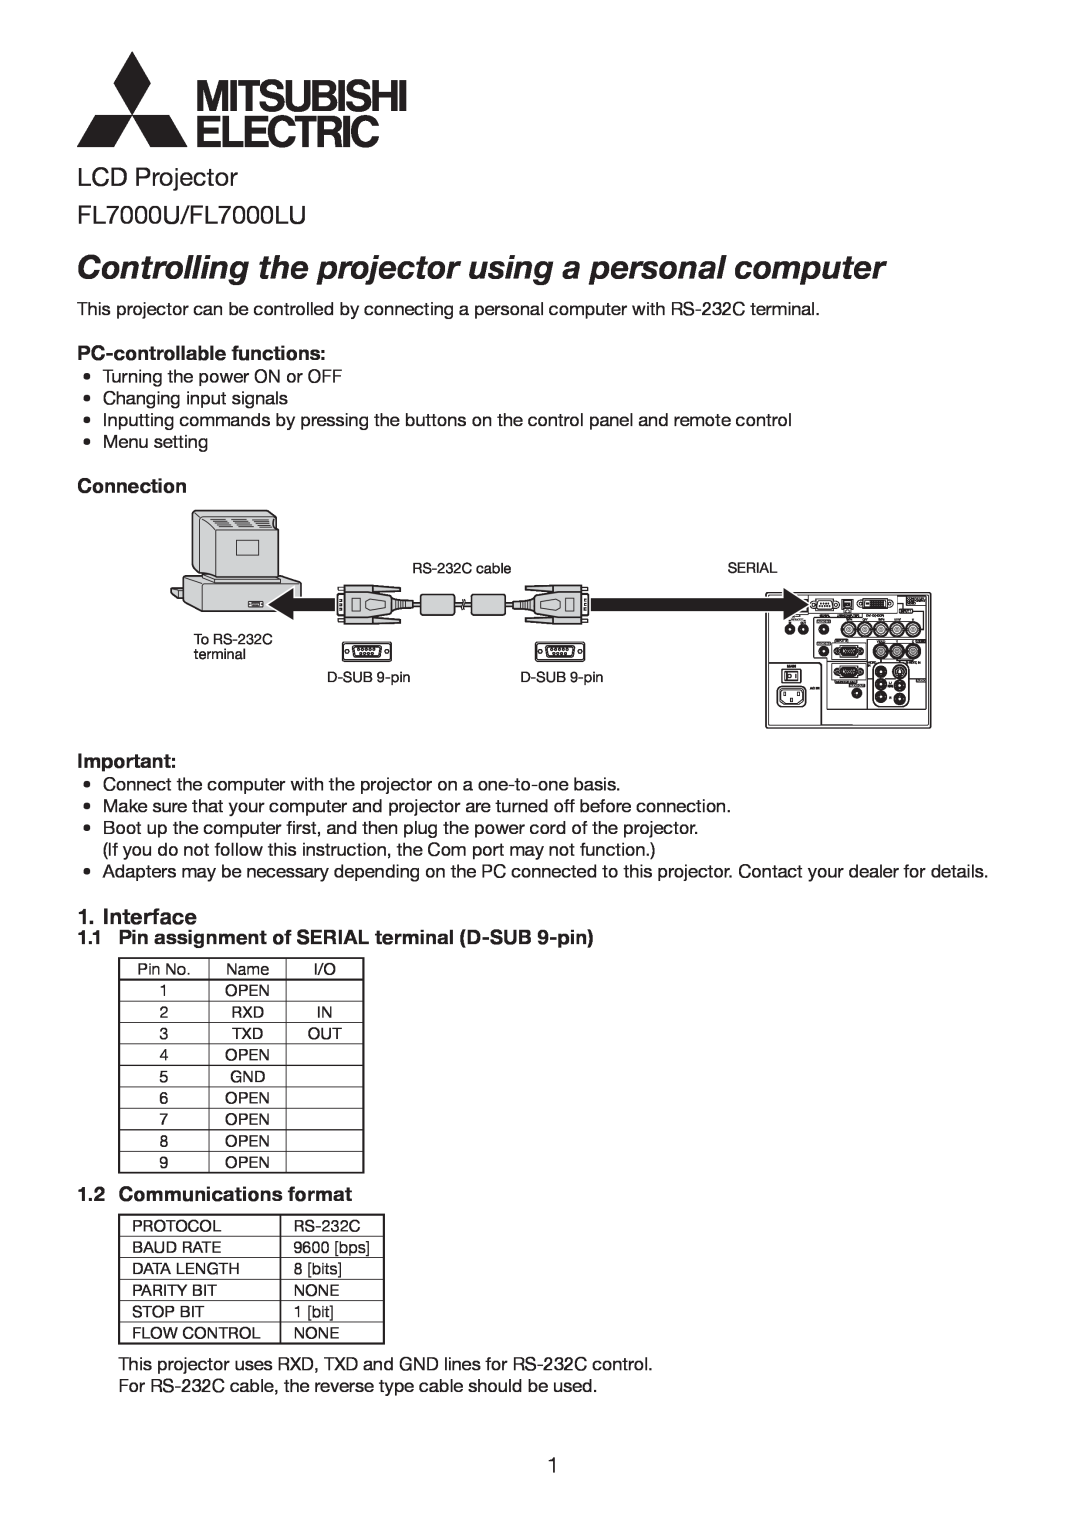 Mitsubishi Electronics FL7000LU manual Interface, PC-controllable functions, Connection, Communications format 